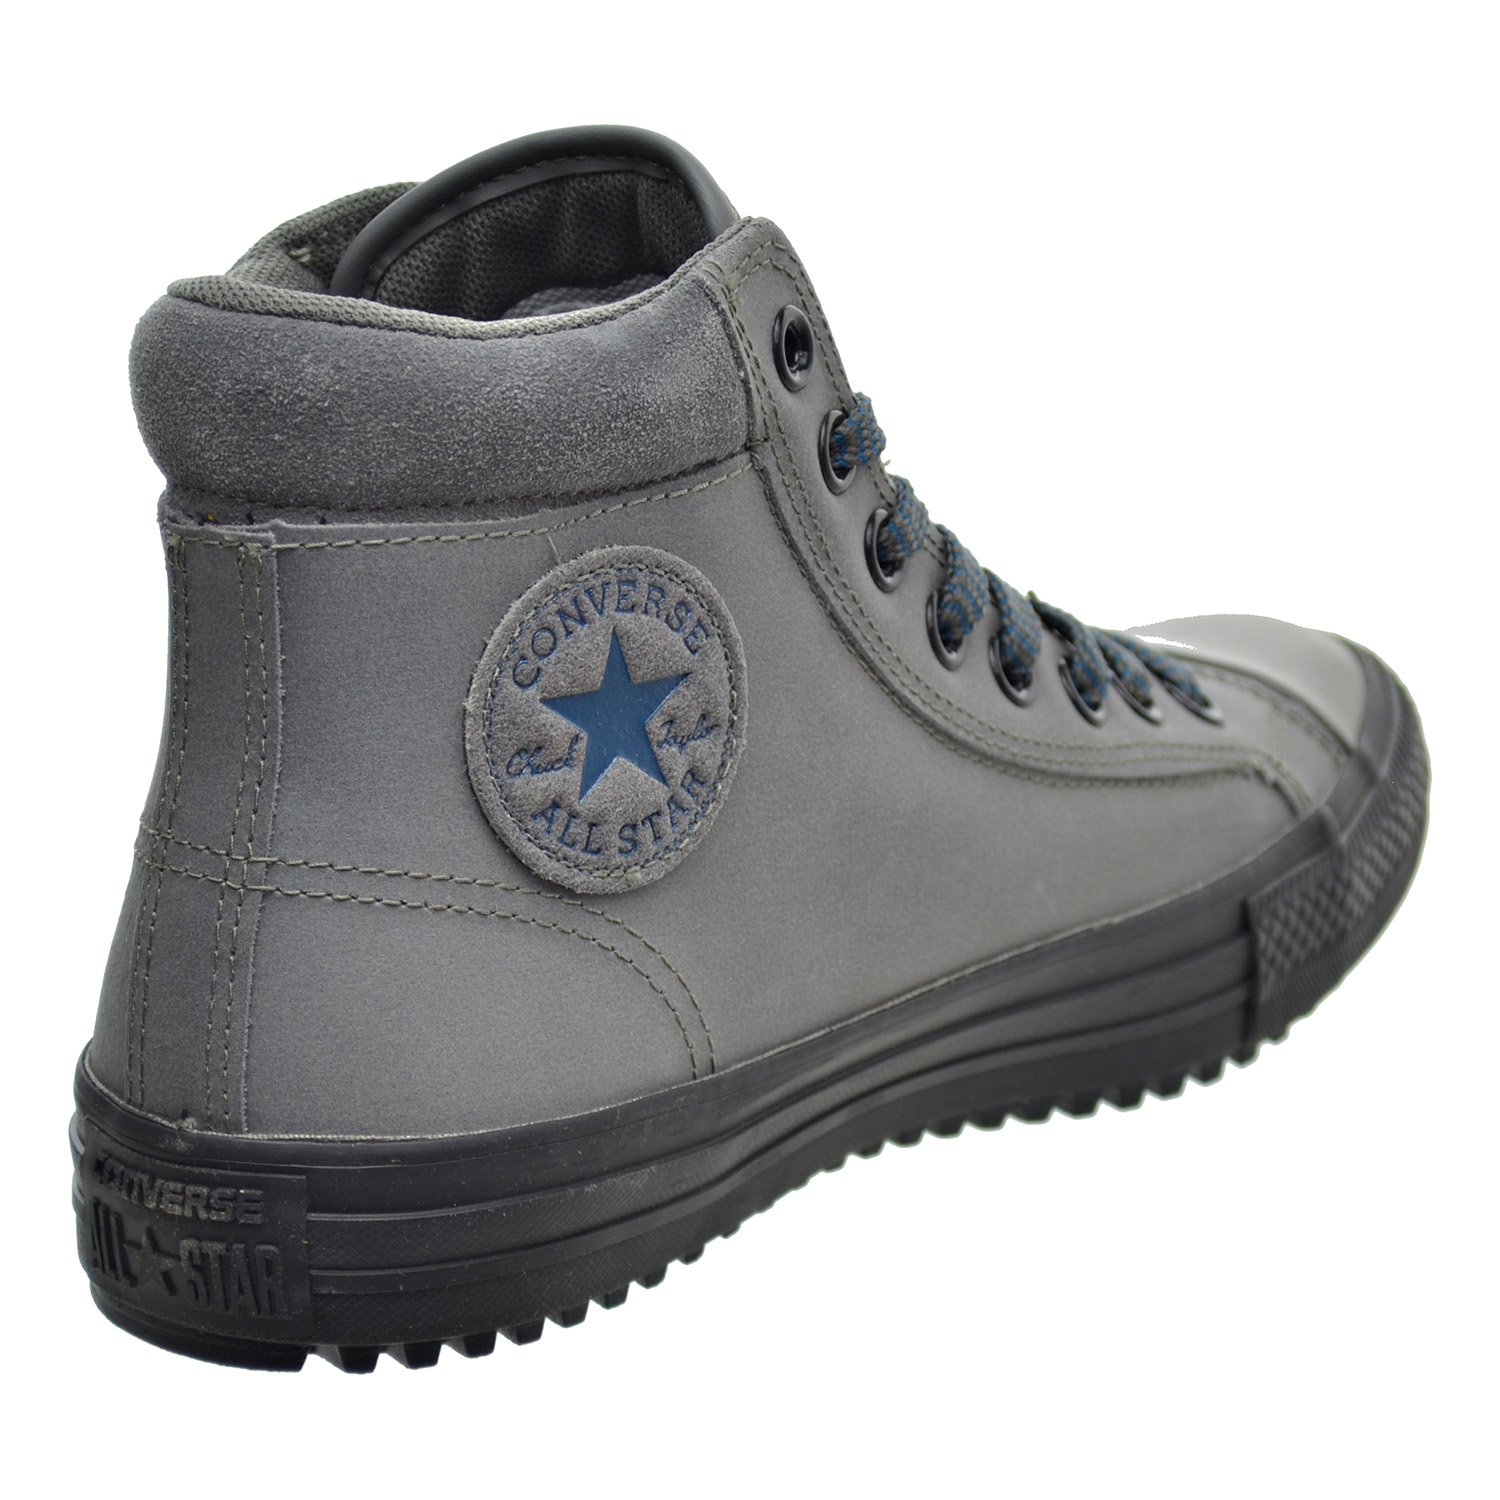 converse all star boots